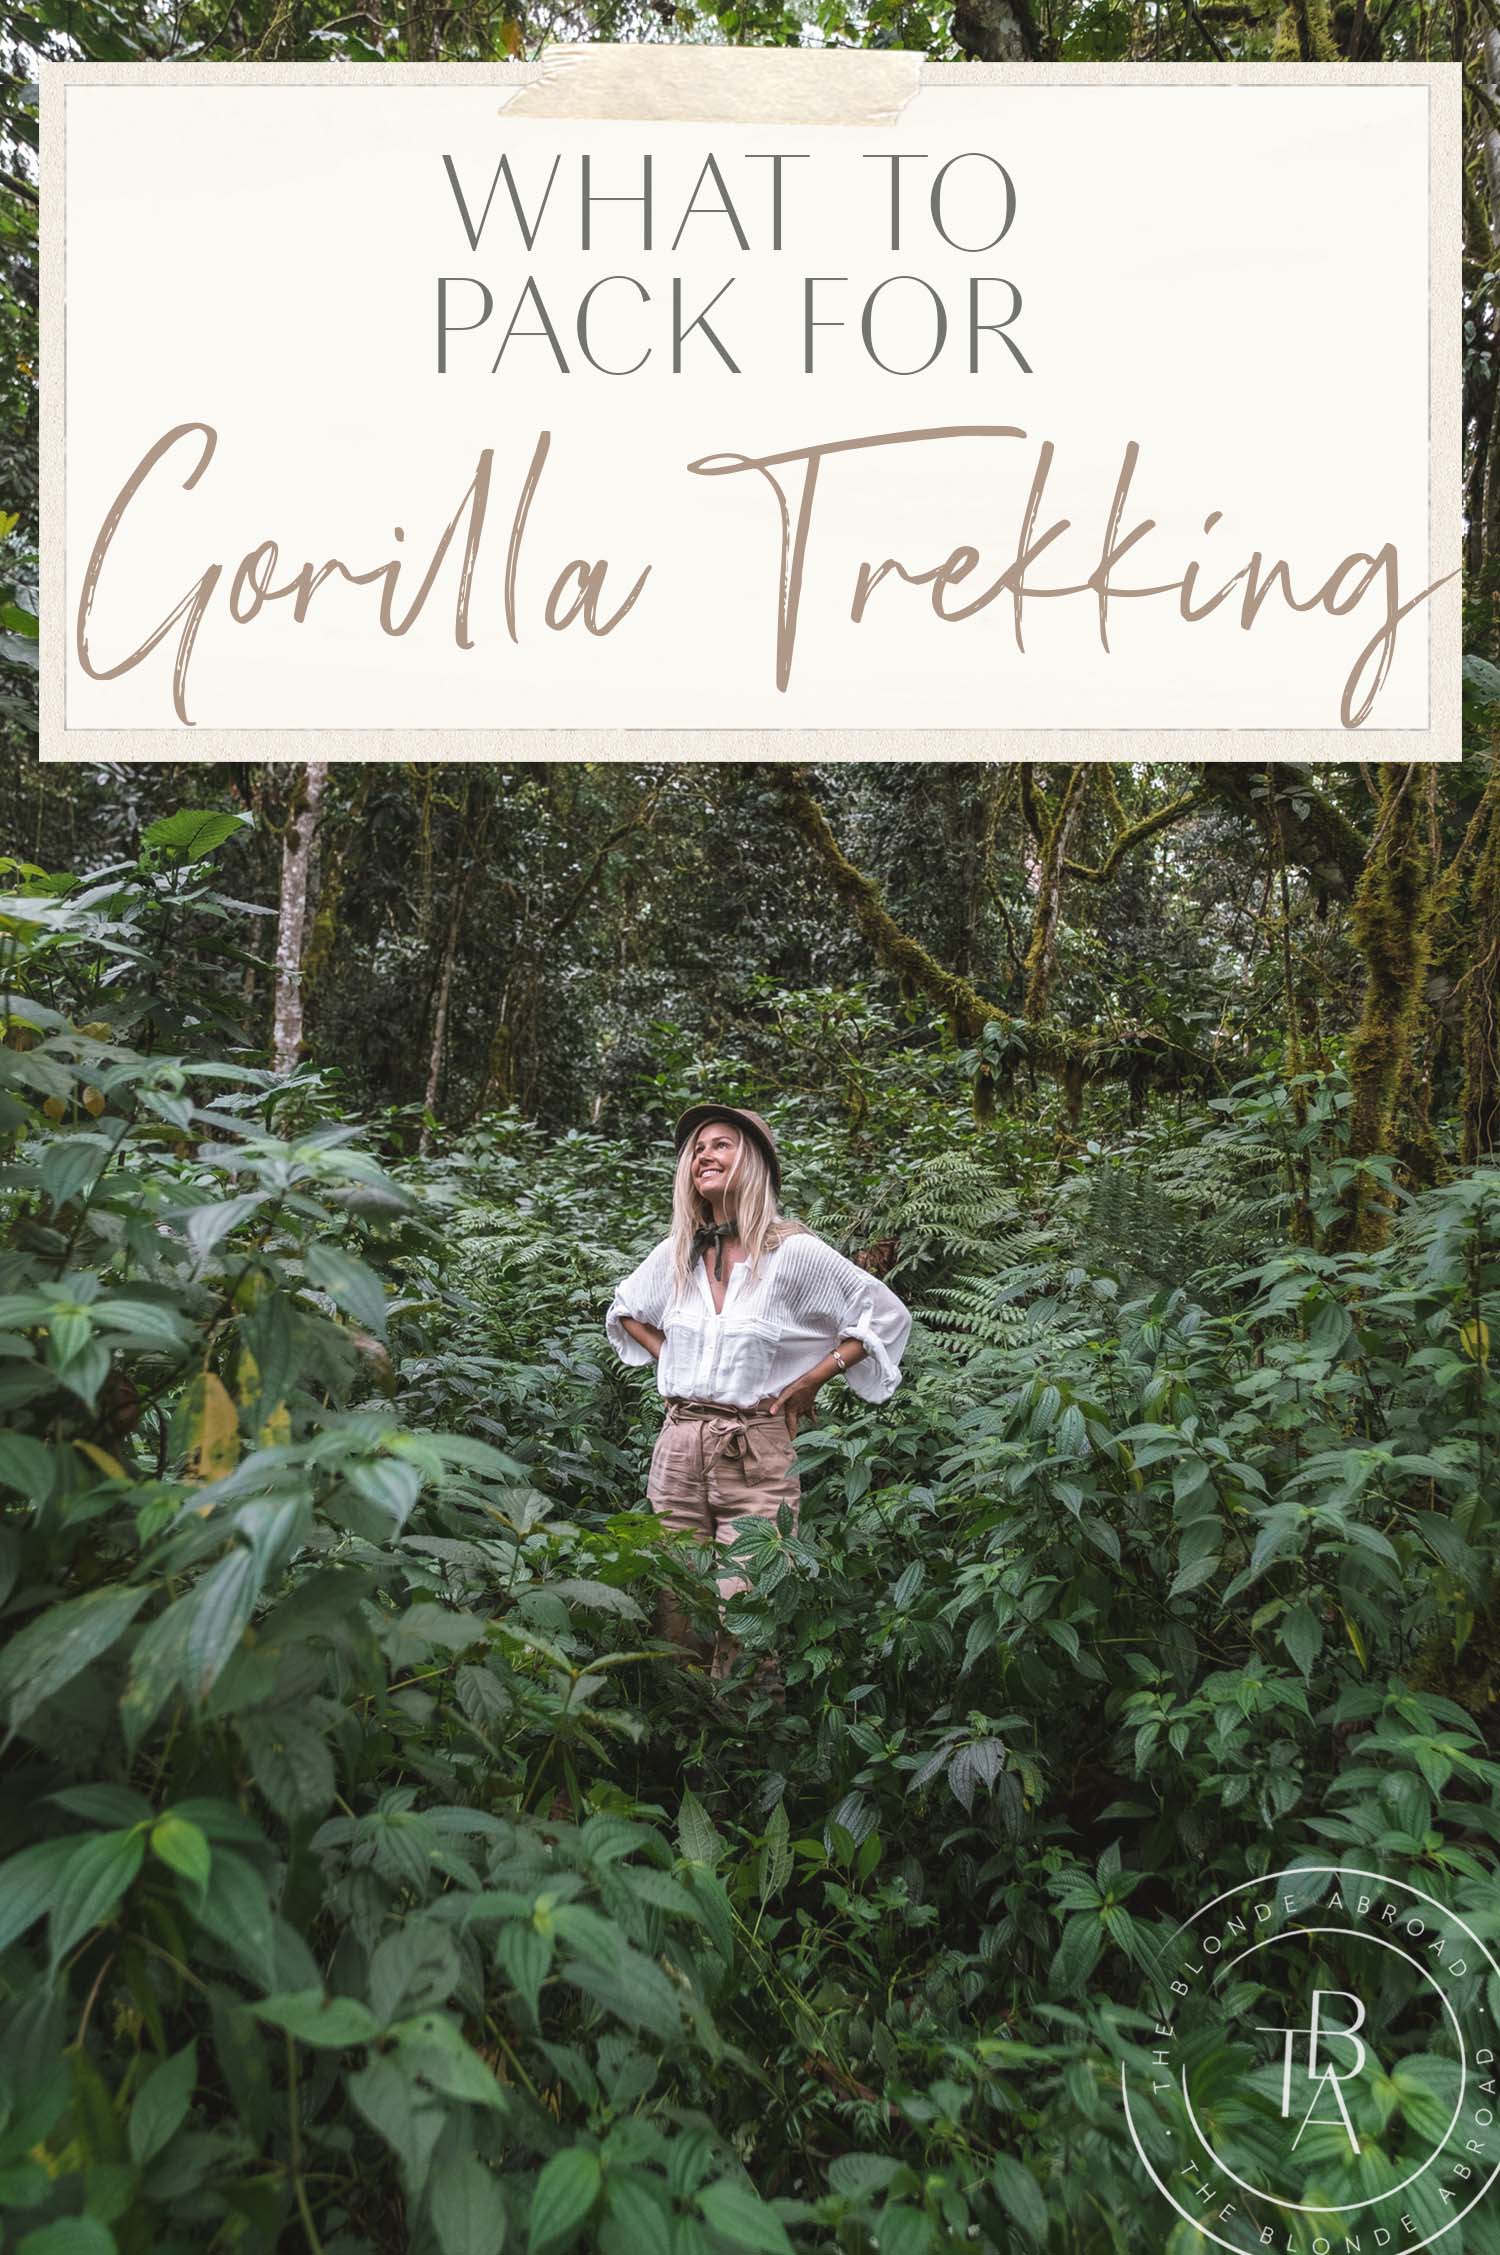 What to Pack for Gorilla Trekking